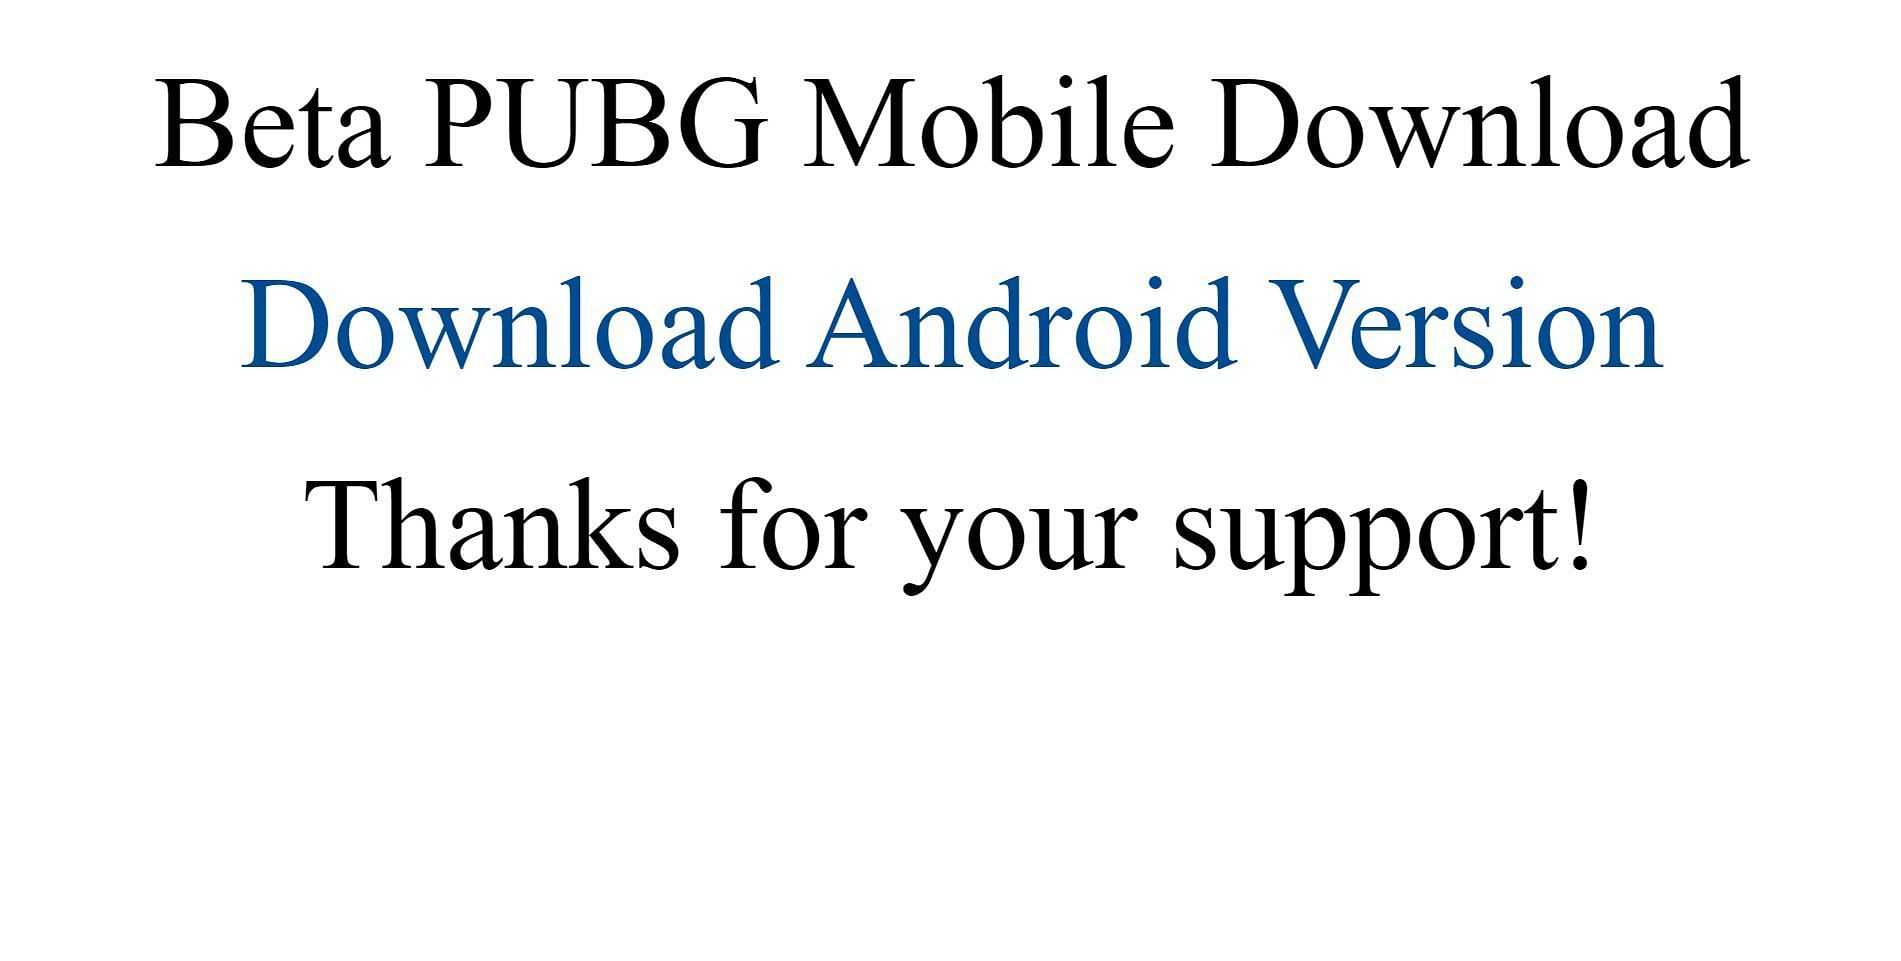 Click on the link in the center to begin the download (Image via PUBG Mobile)